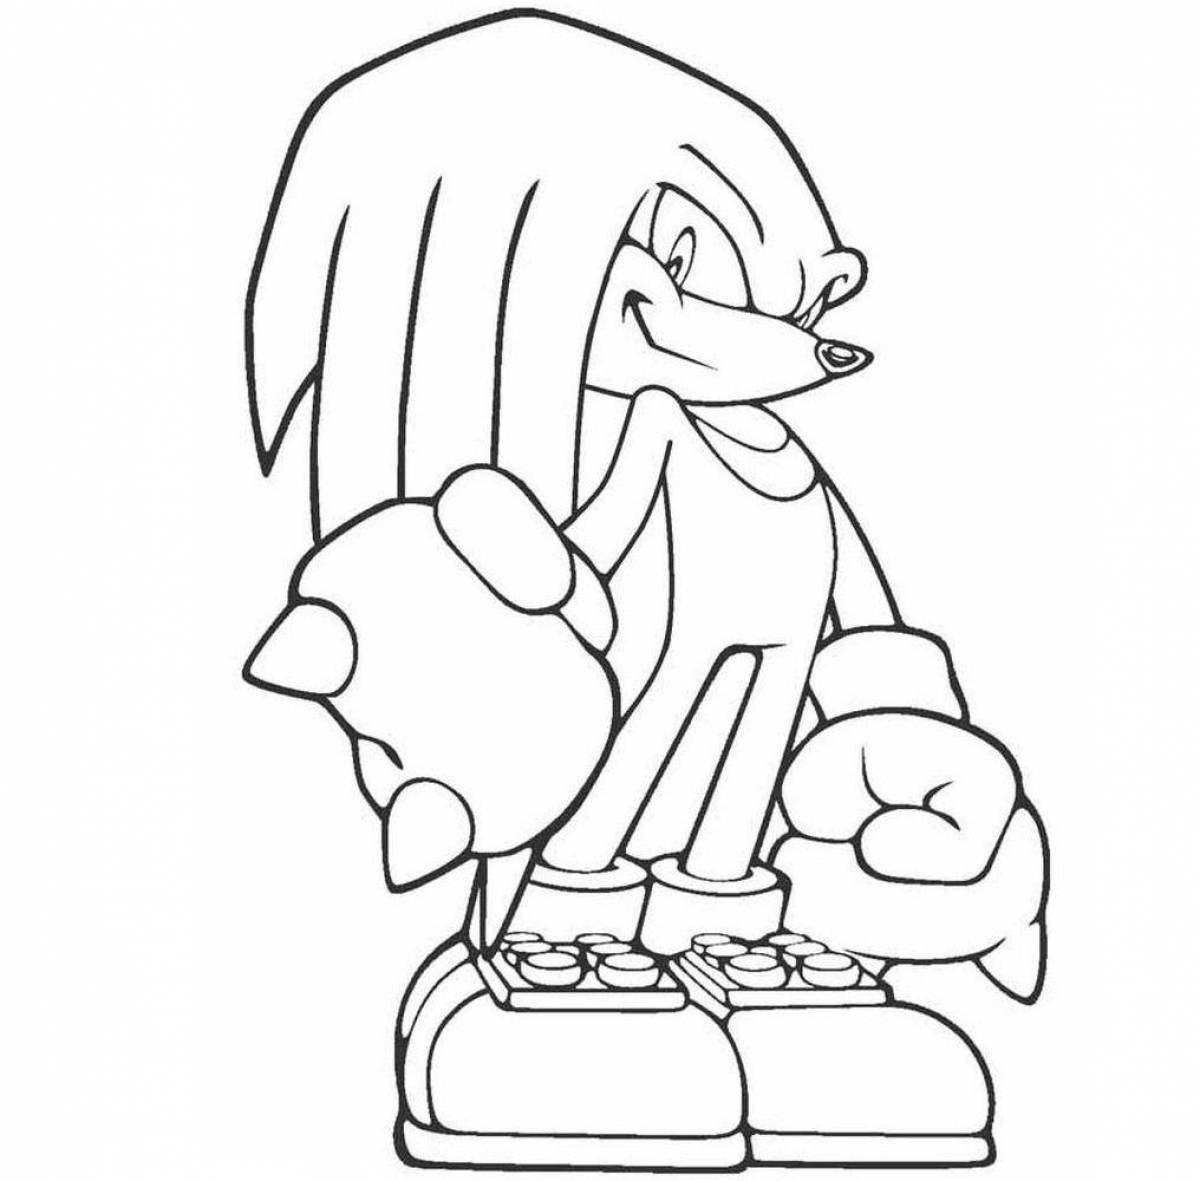 Super knuckles great coloring book